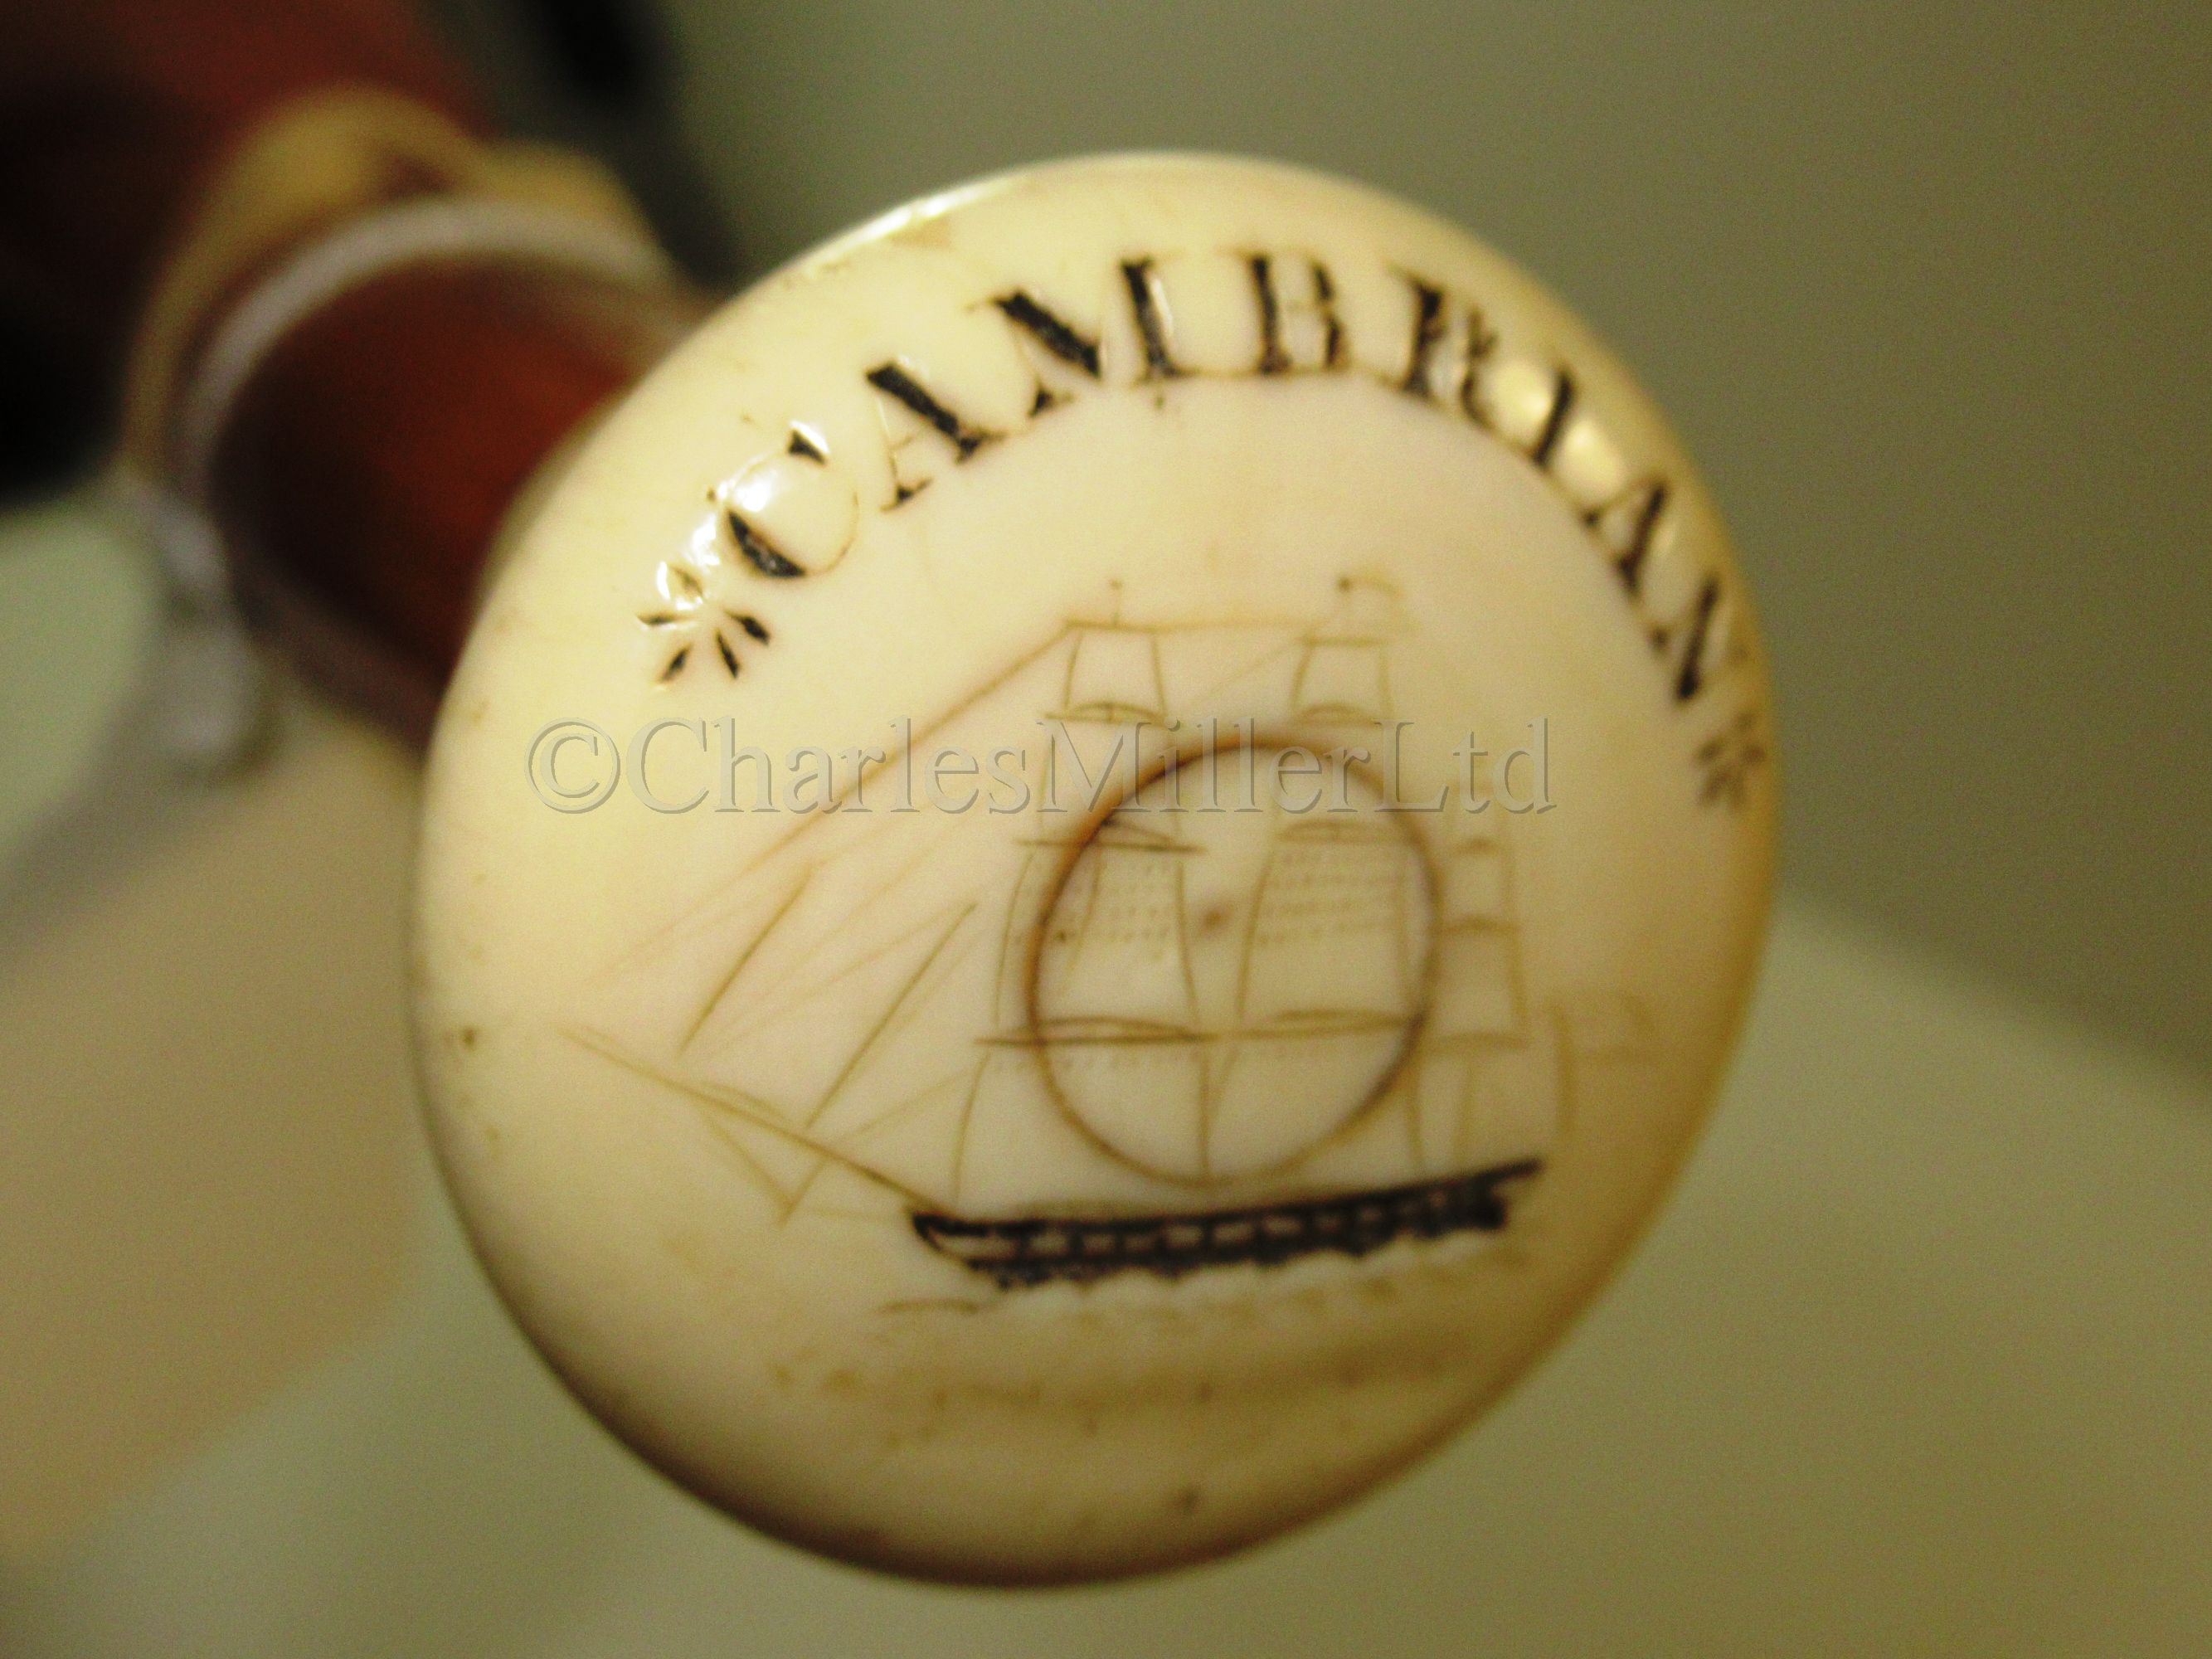 Ø A 19TH CENTURY MALACCA AND MARINE IVORY WALKING STICK COMMEMORATING THE WHALER CAMBRIAN - Image 3 of 4